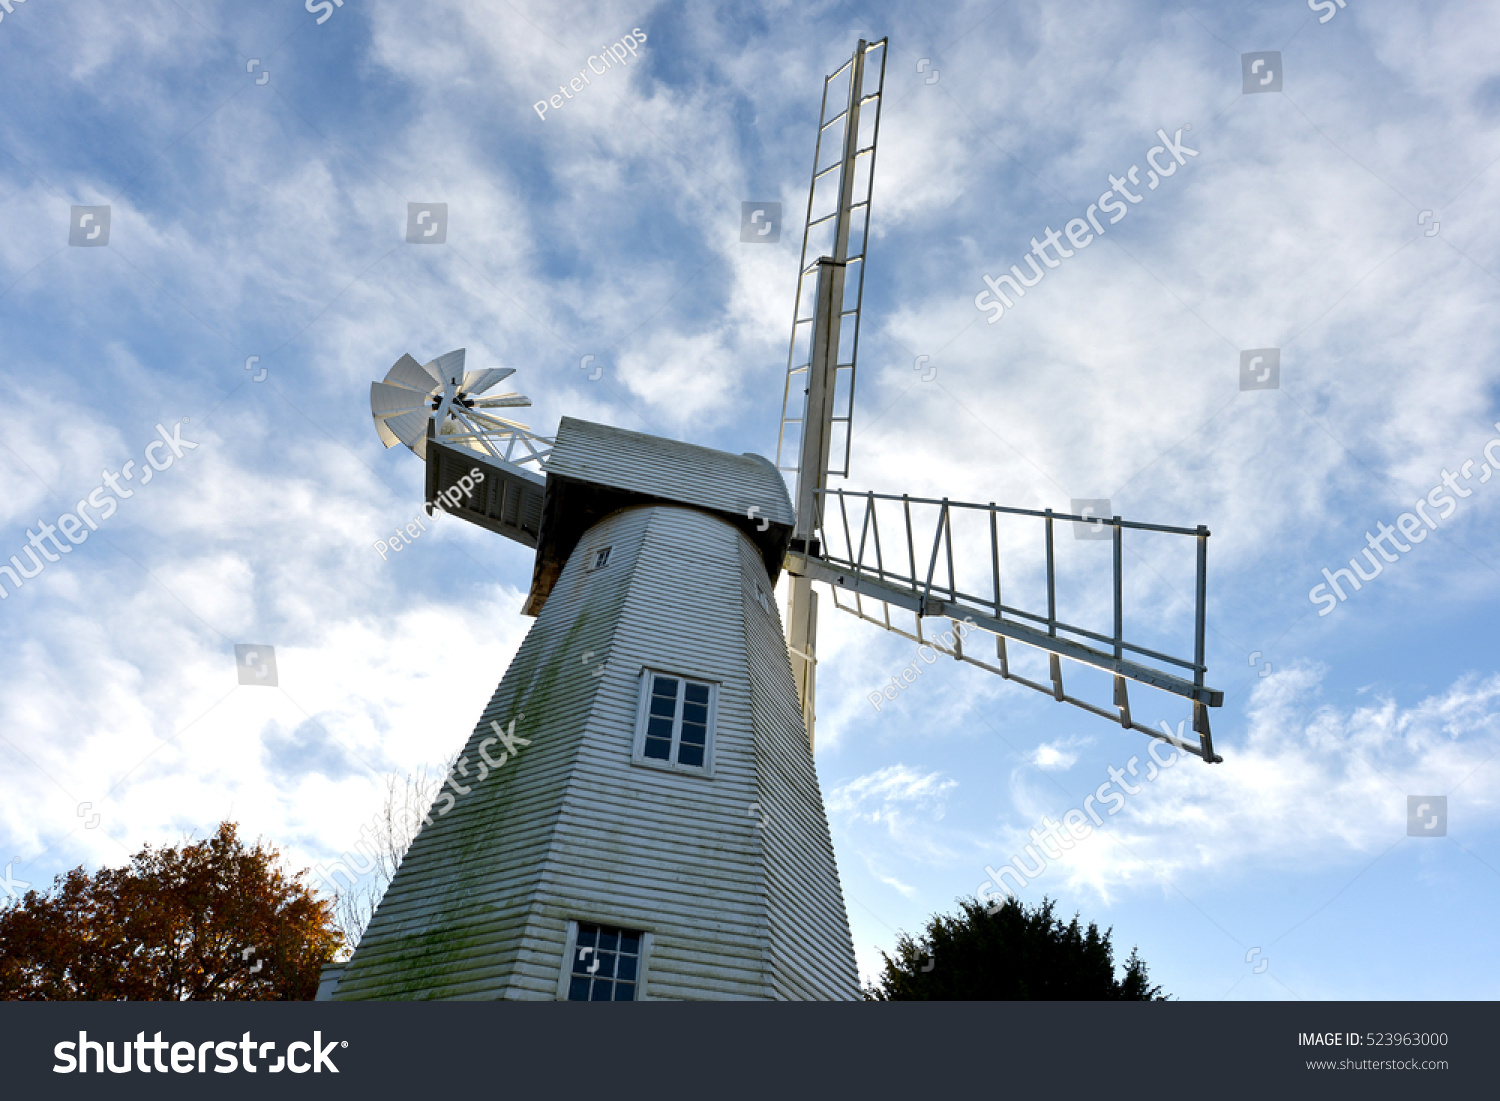 White wooden windmill in front of blue sky #523963000